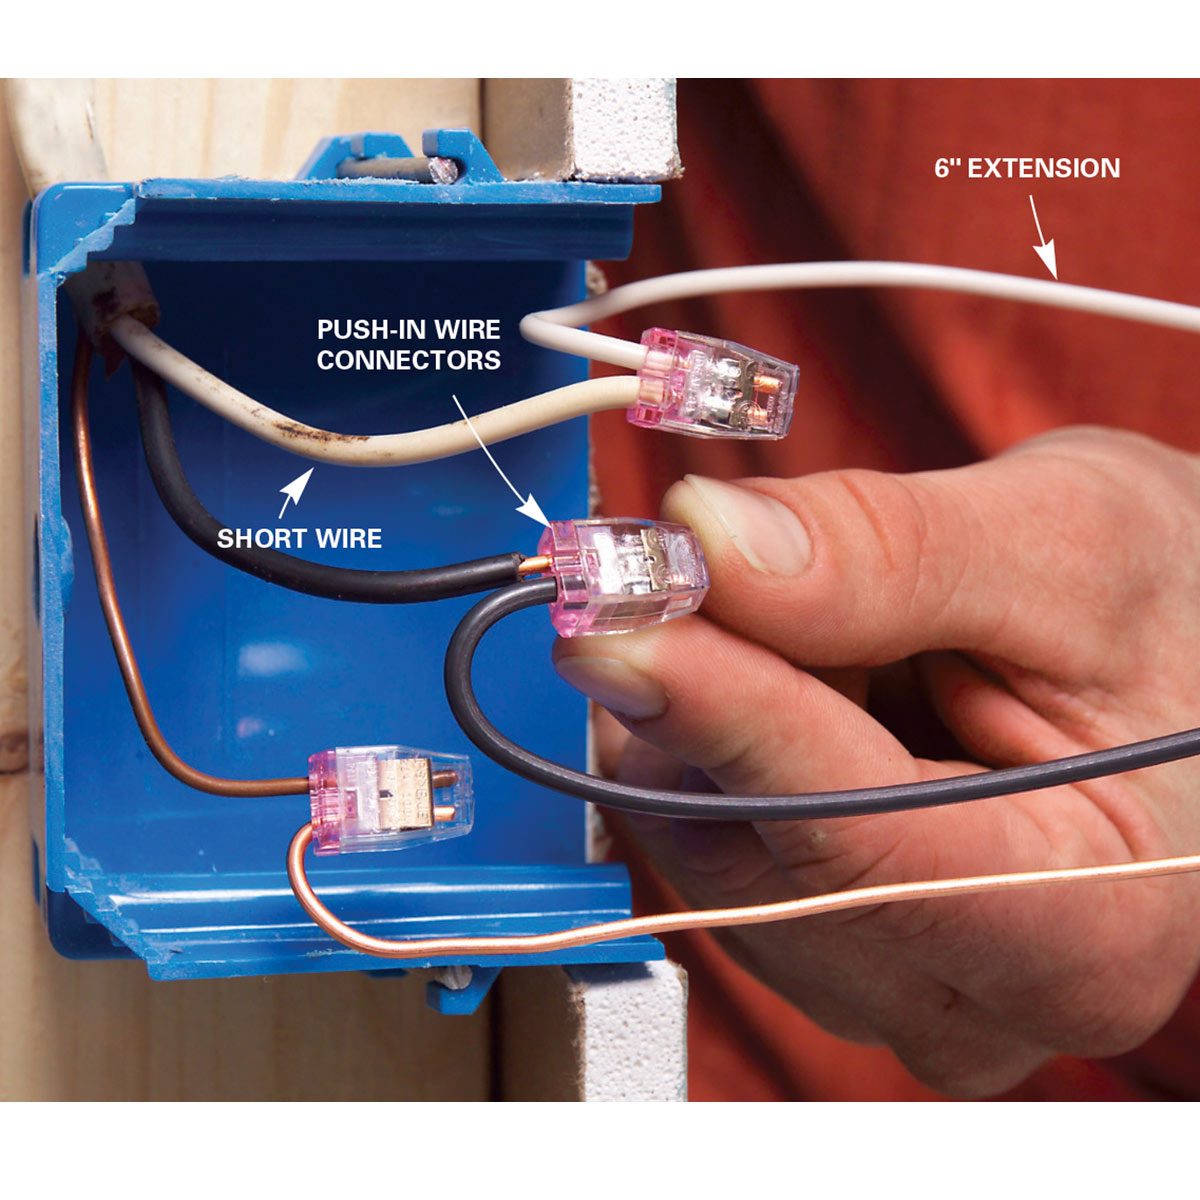 Wiring a Switch and Outlet the Safe and Easy Way | Family Handyman